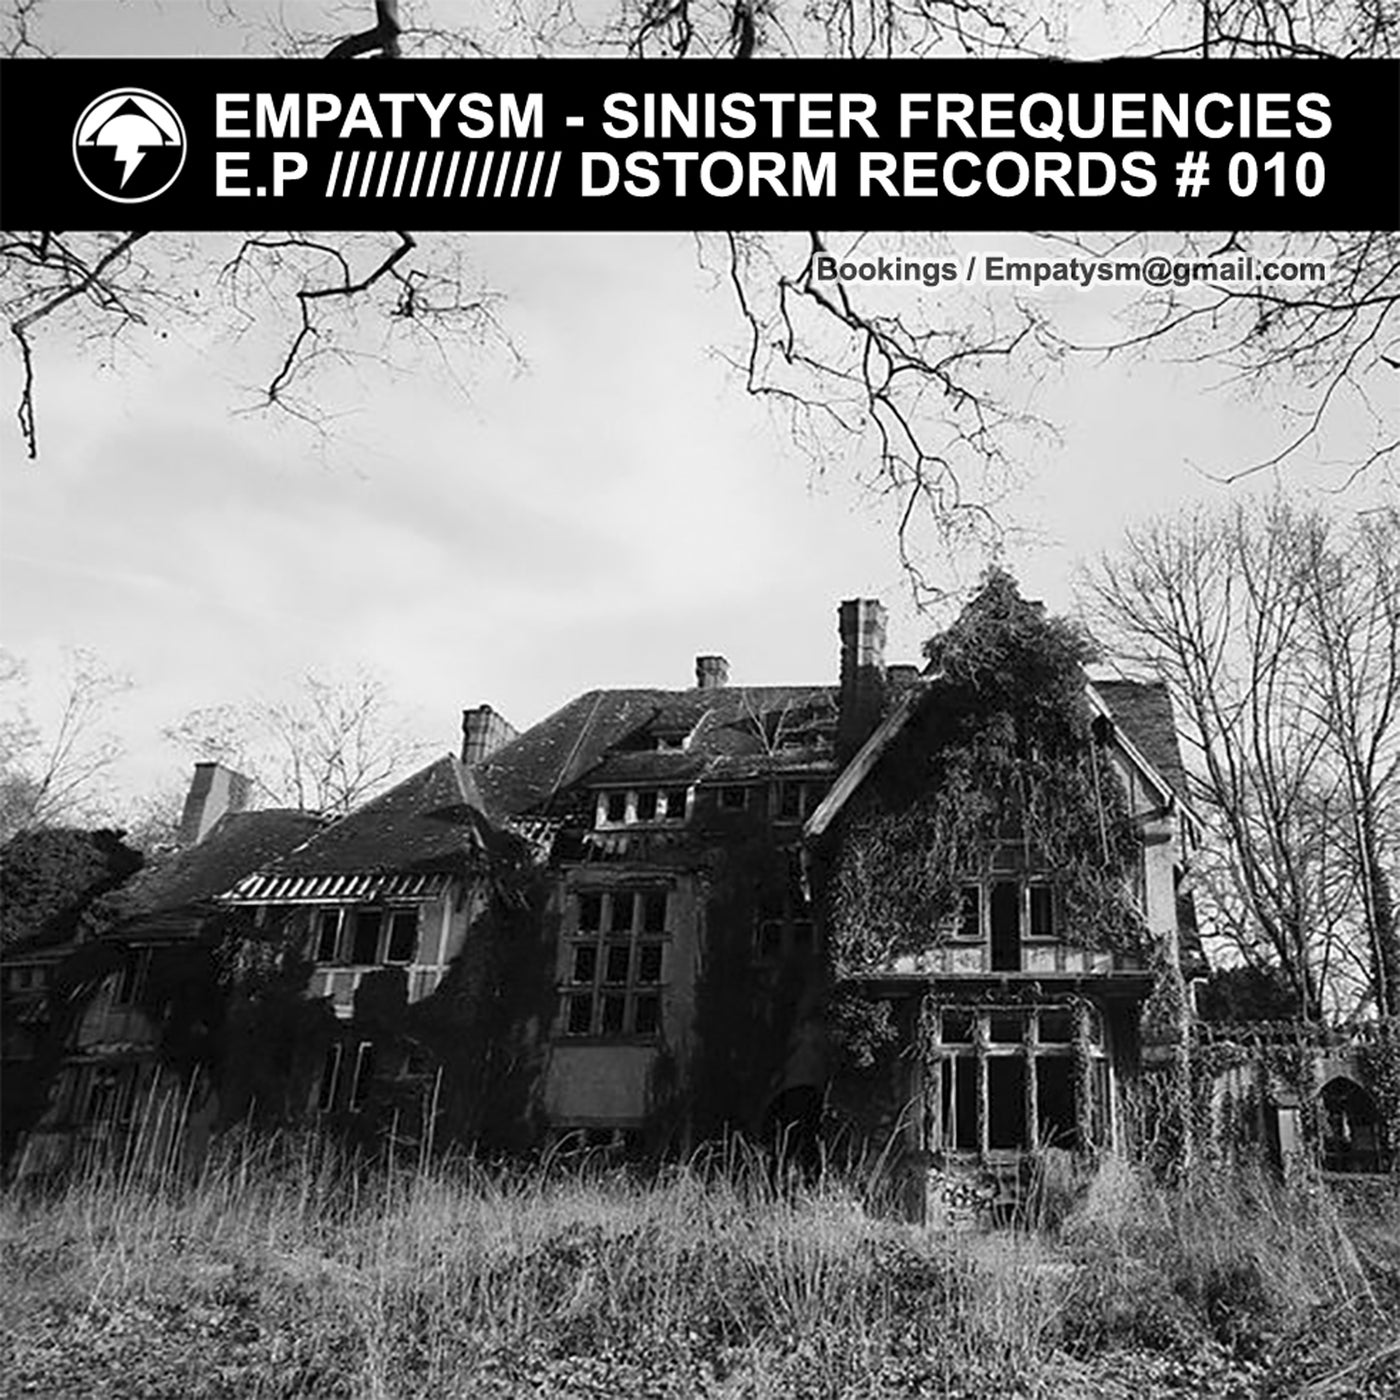 Sinister Frequencies